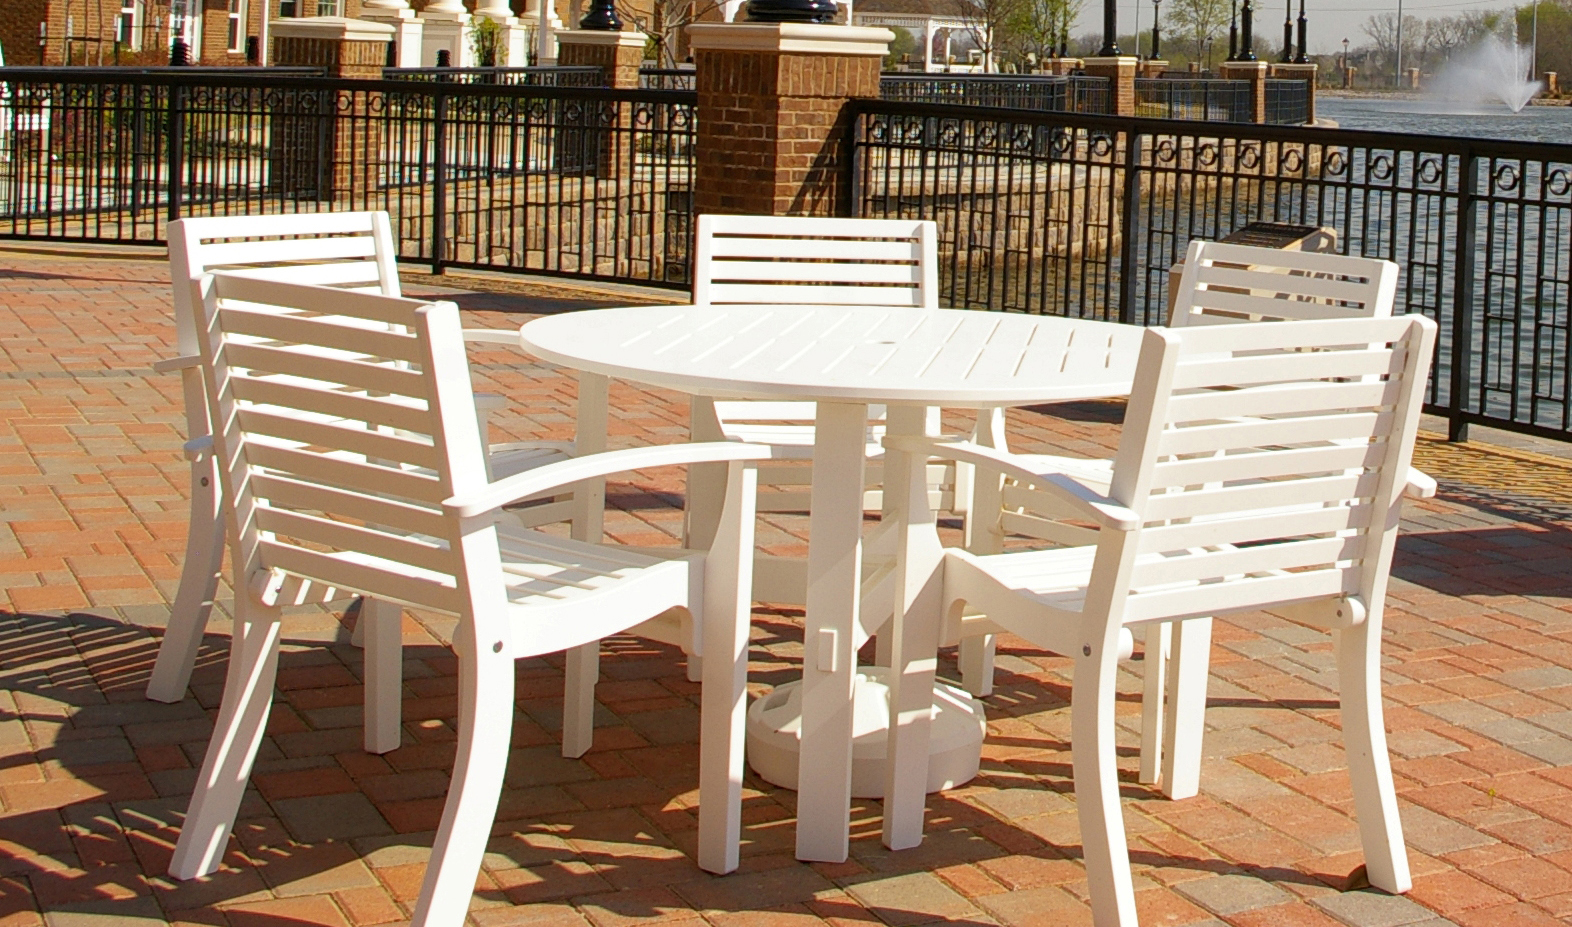   Poly Concepts   Ultimate Comfort.&nbsp;Lowest Maintenance. Premiere Outdoor Furniture Luxury.   Learn More  